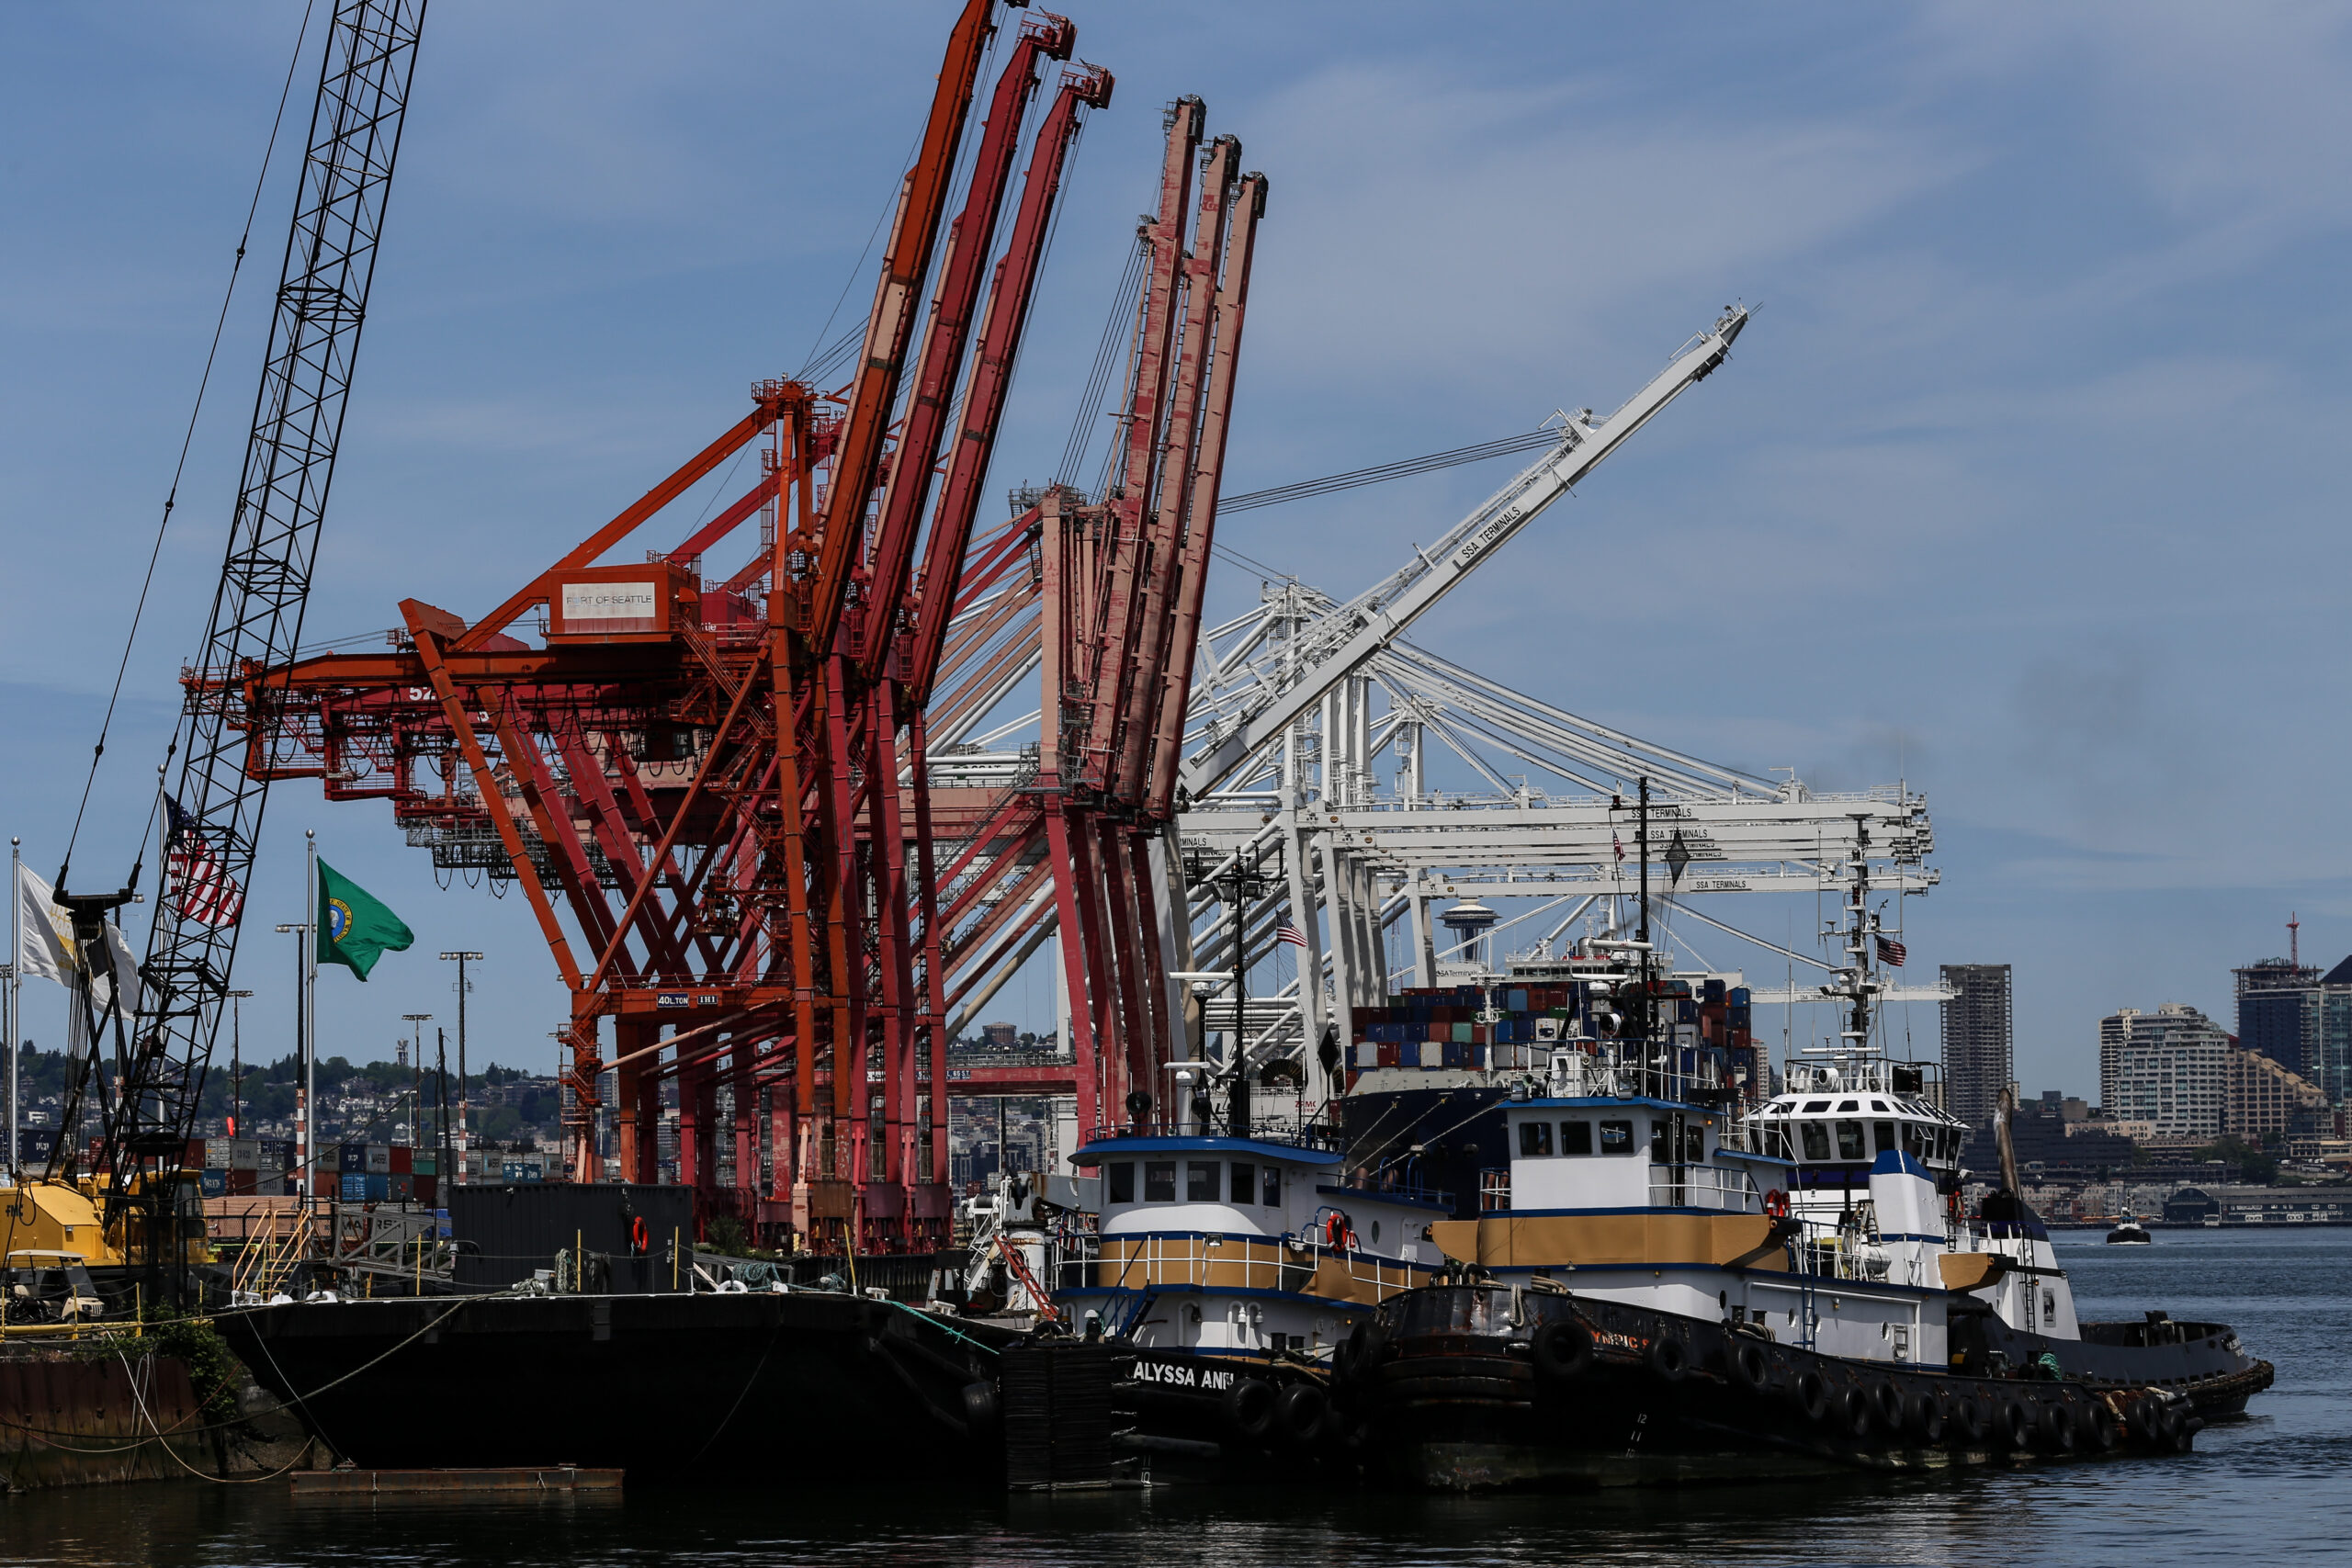 Tugs at the Port of Seattle